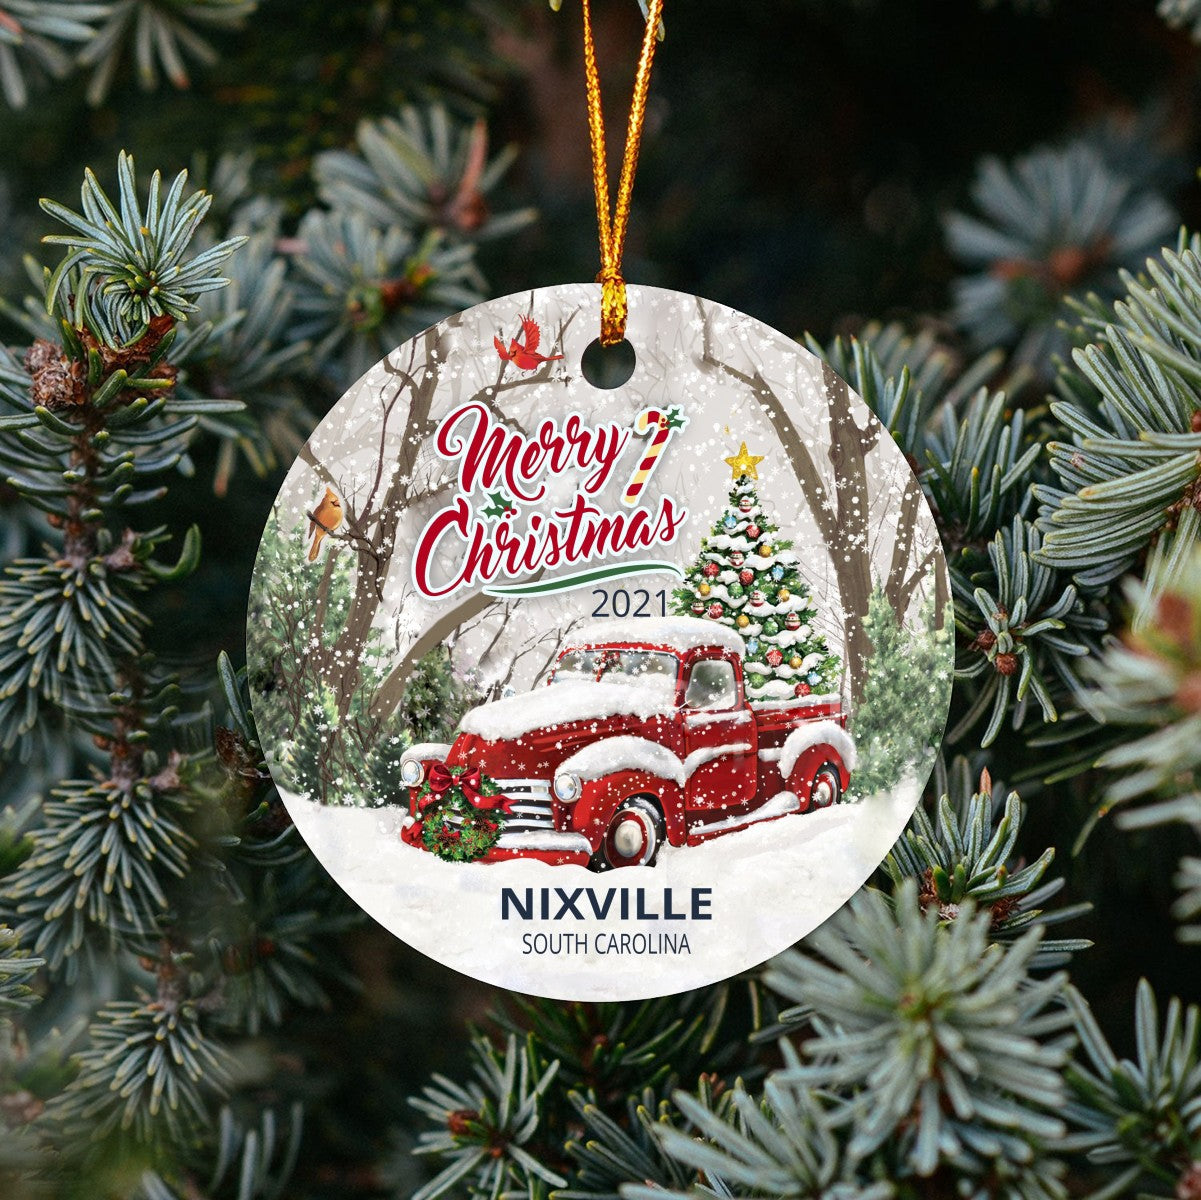 Christmas Tree Ornaments Nixville - Ornament With Name City, State Nixville South Carolina SC Ornament - Red Truck Xmas Ornaments 3'' Plastic Gift For Family, Friend And Housewarming